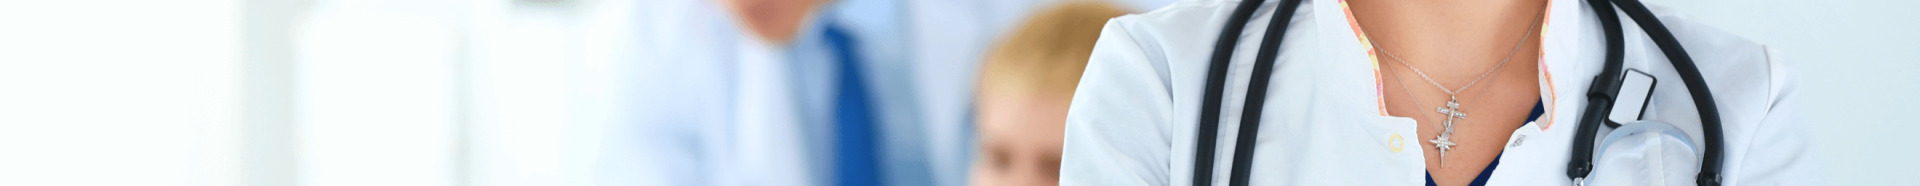 banner-03.png